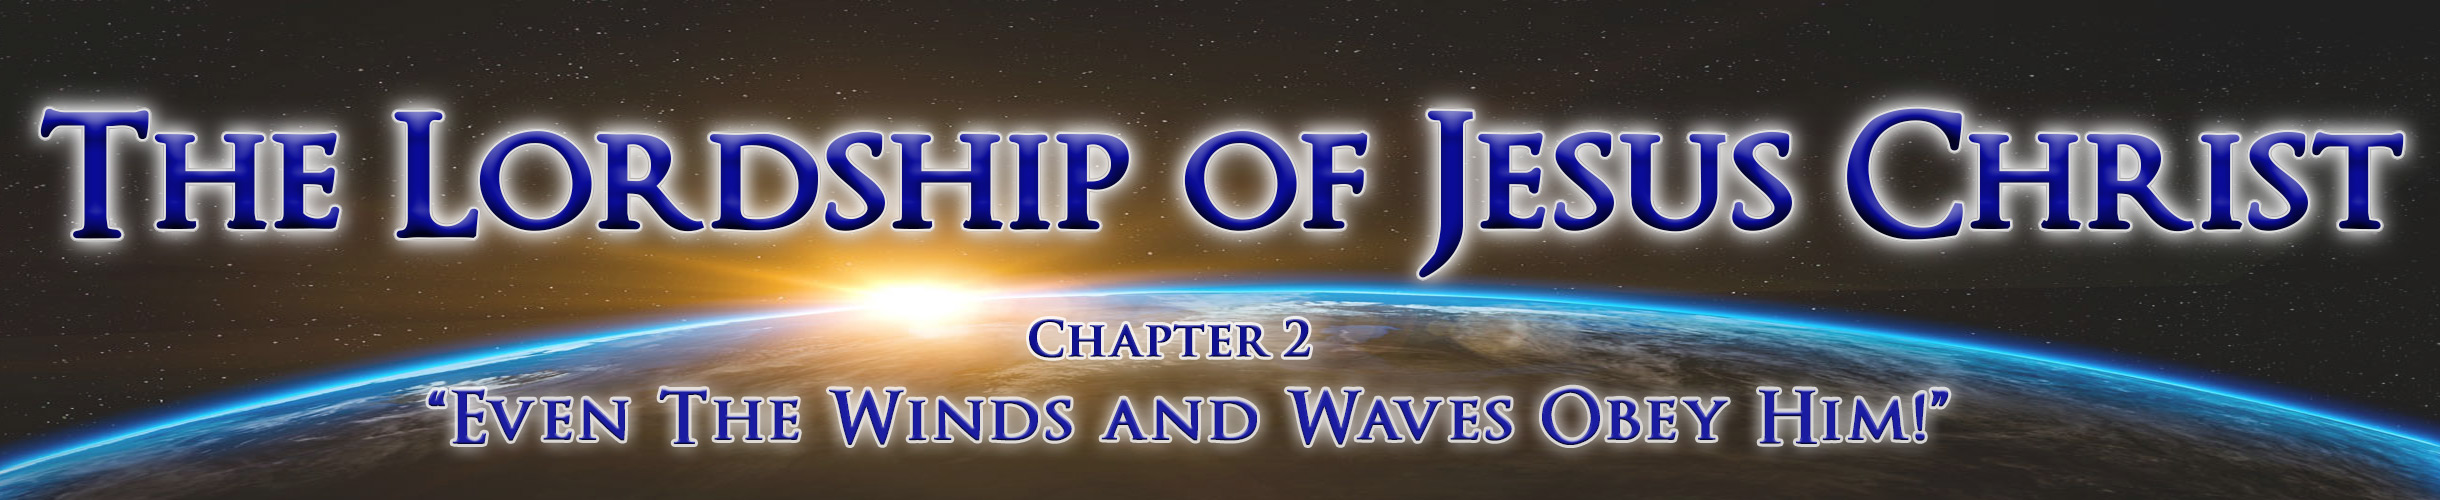 The Lordship of Jesus Christ, Chapter 2